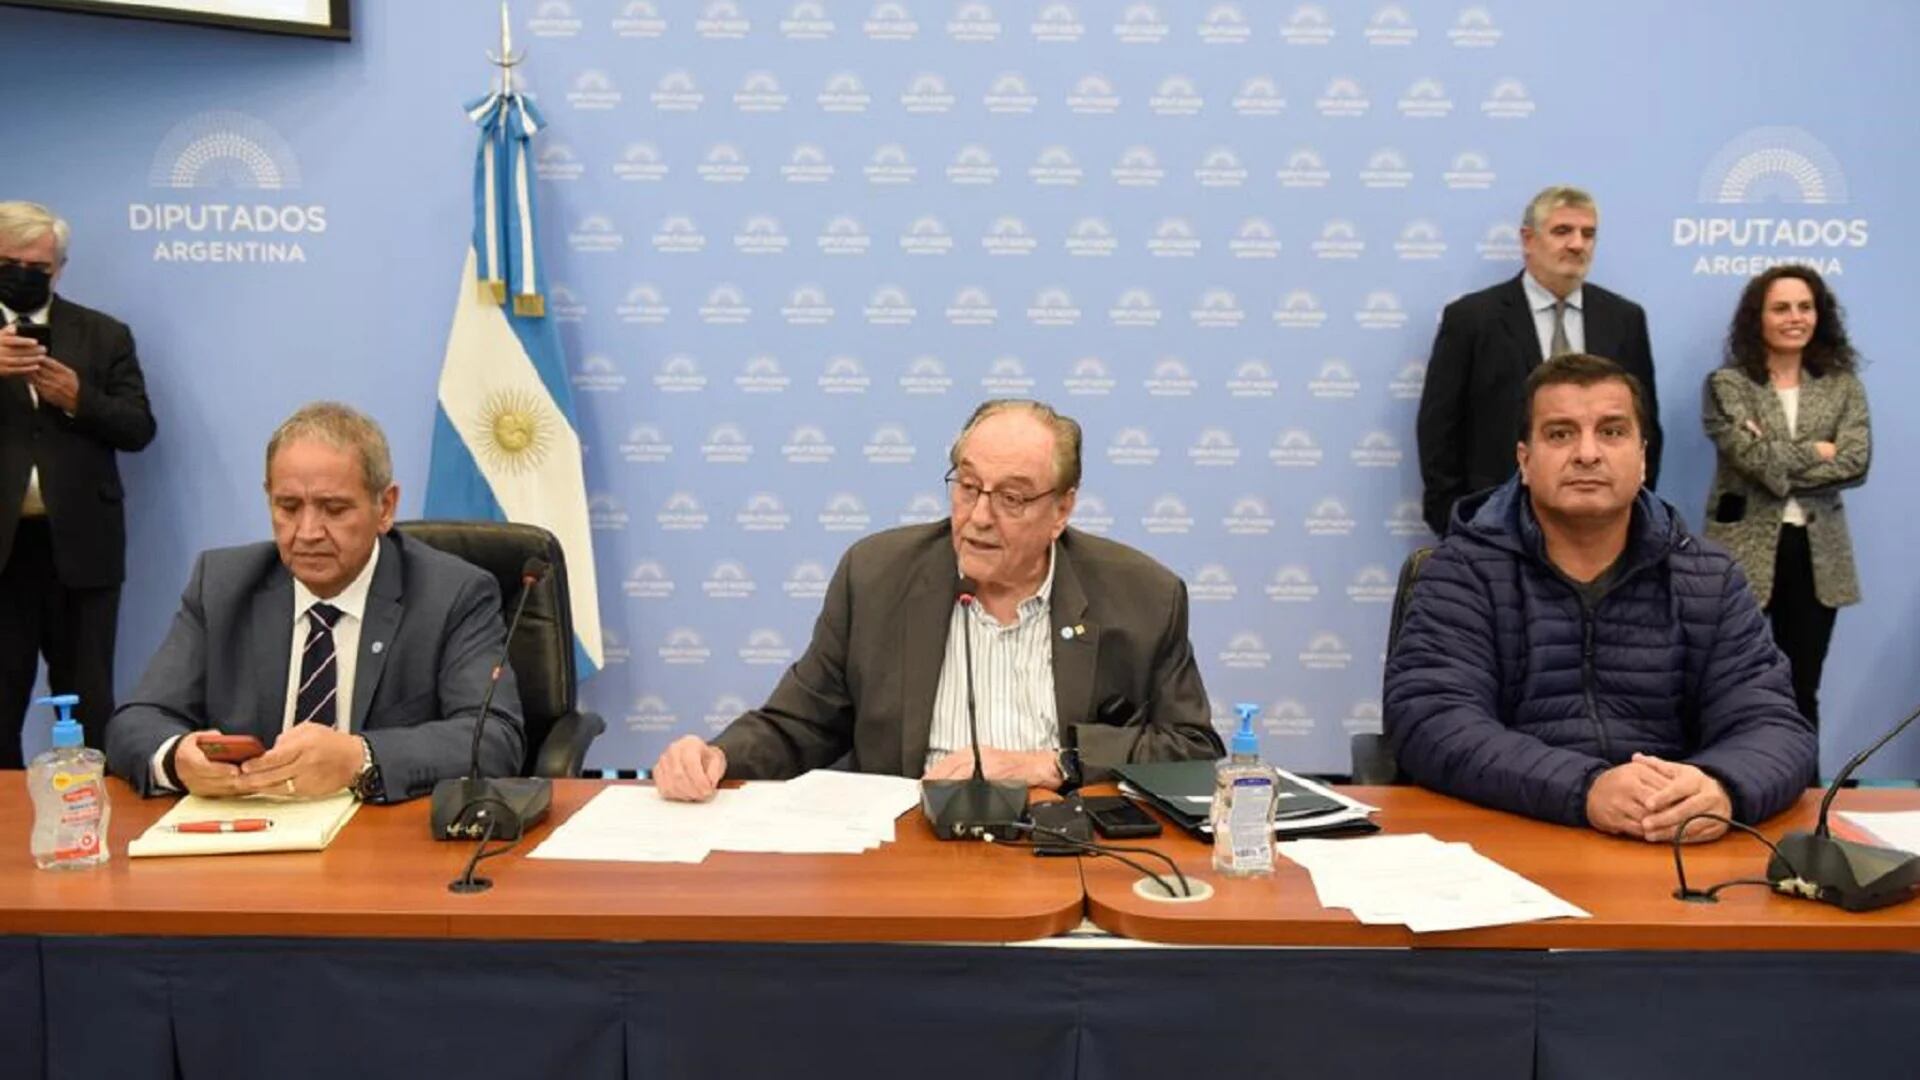 Carlos Heller, president of the Budget commission, together with Marcelo Casaretto and Sergio Palazzo